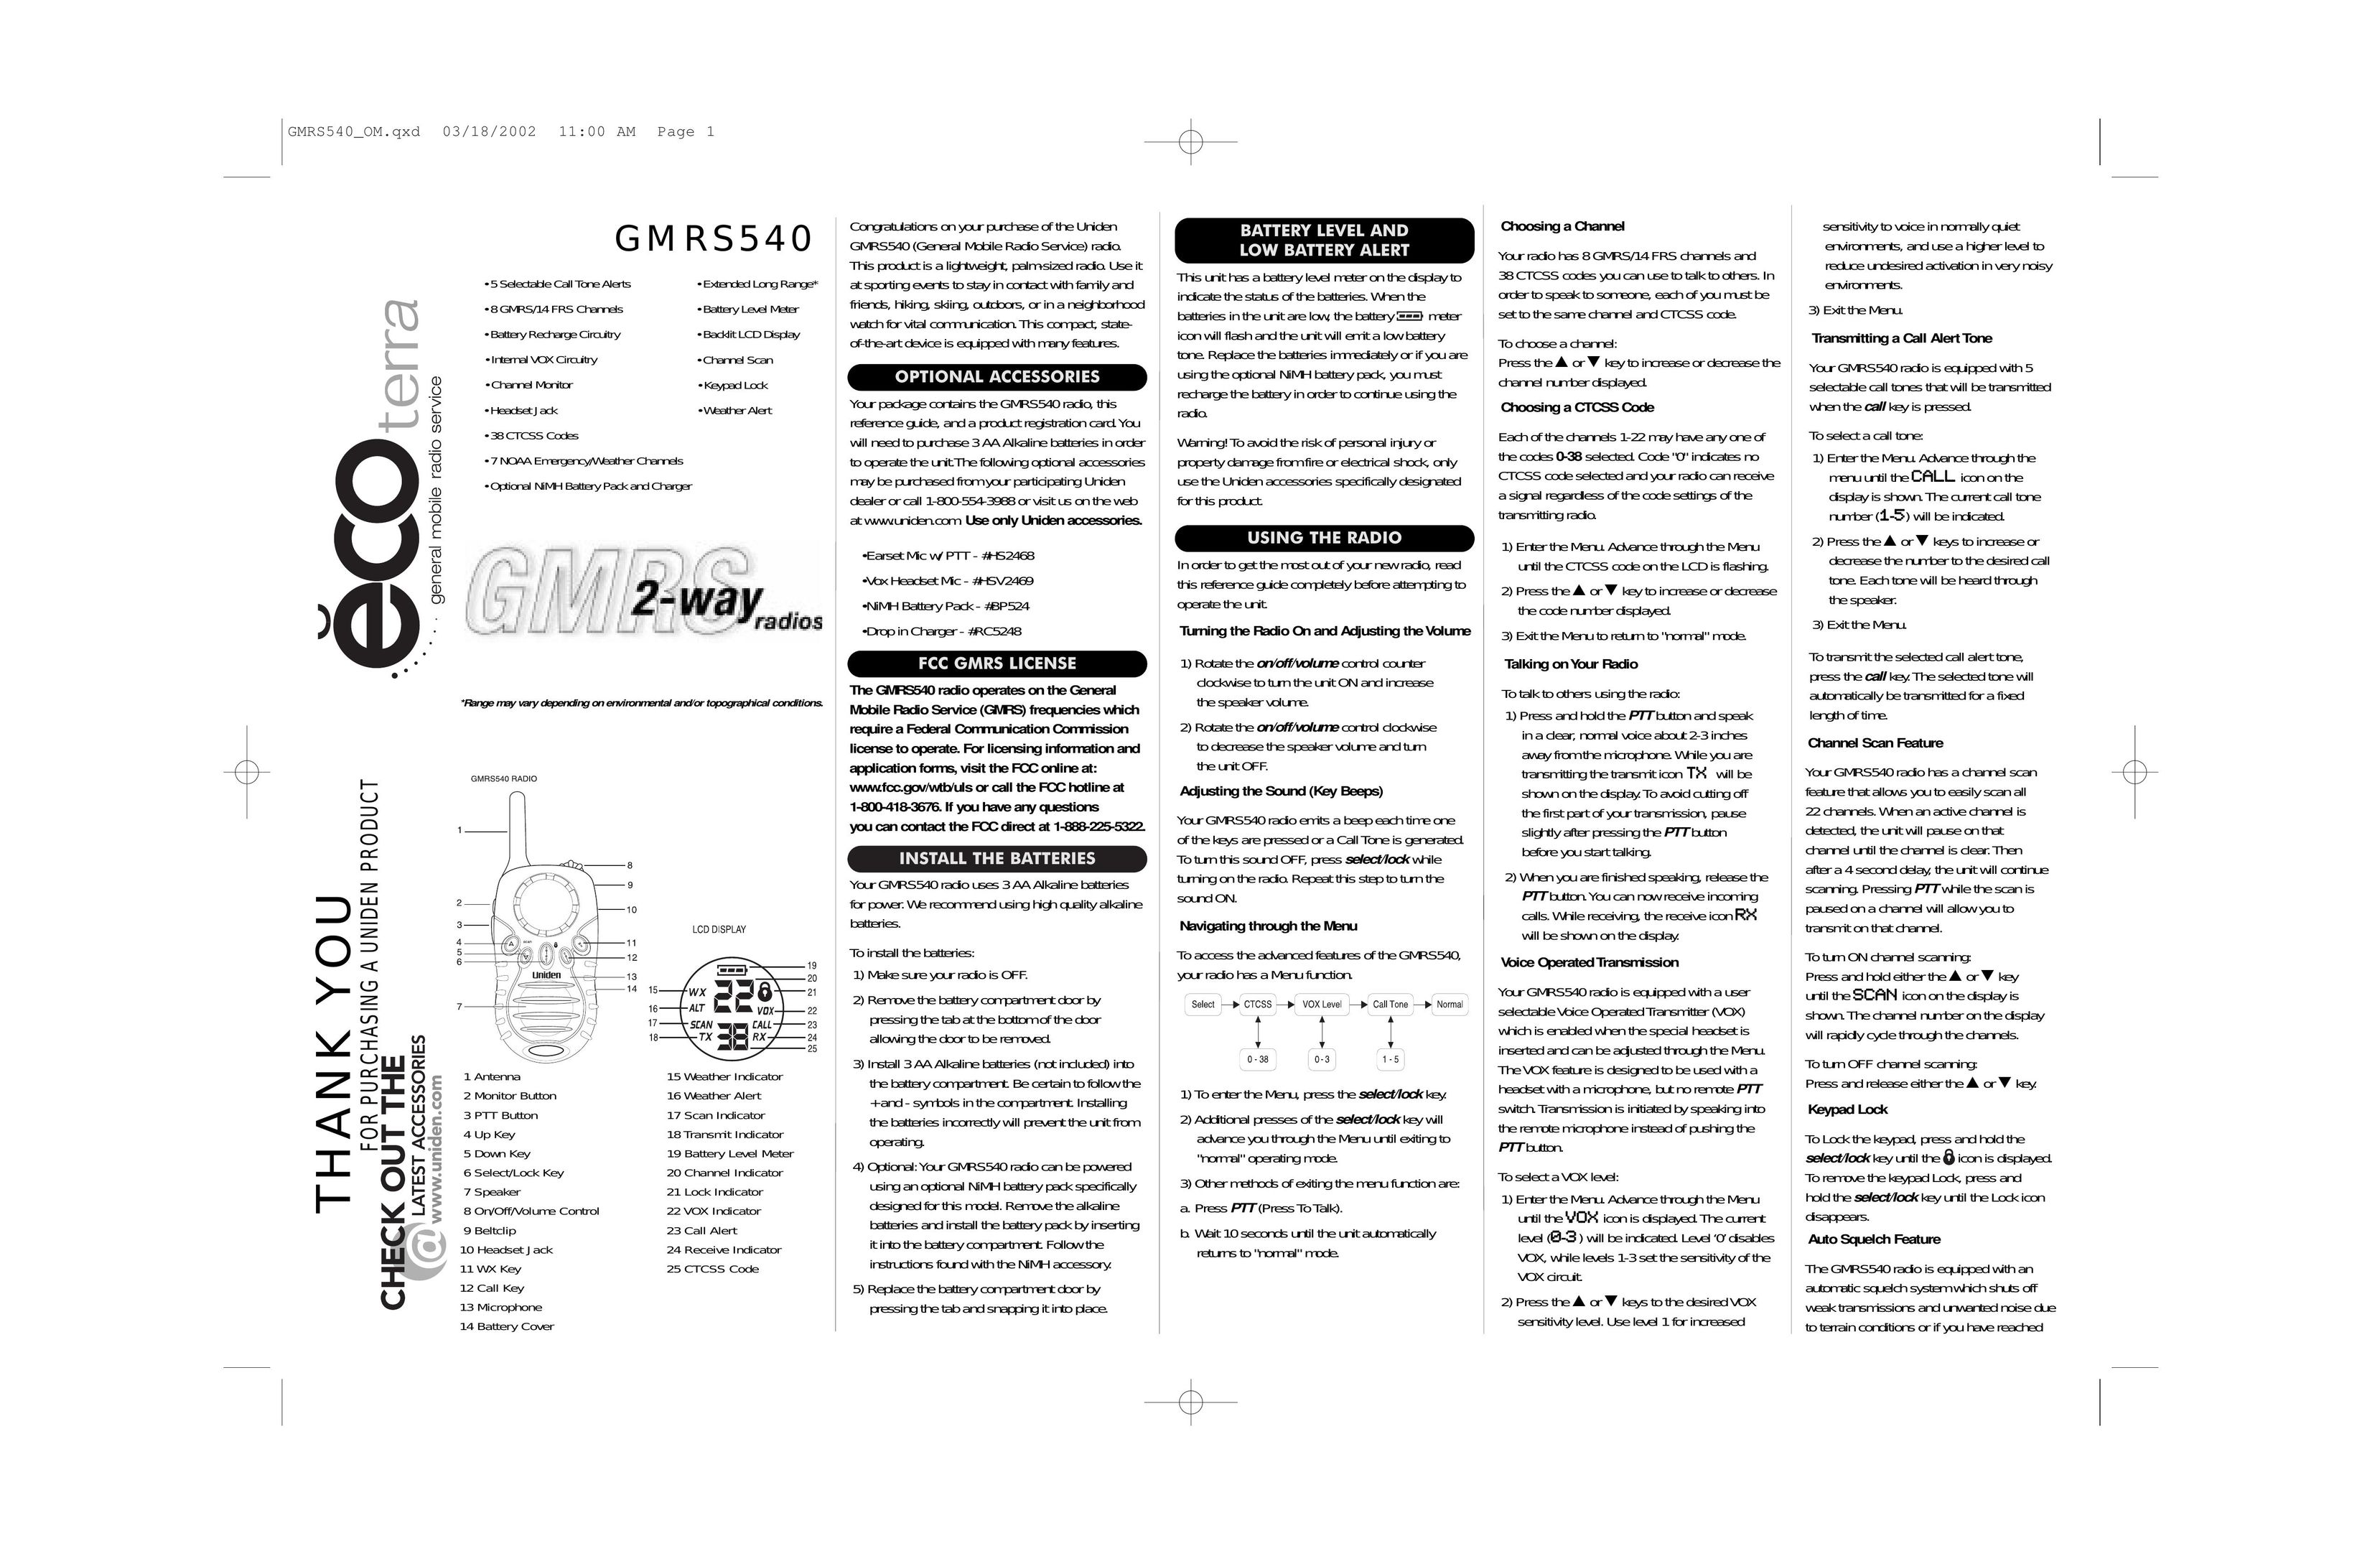 Uniden GMRS540 Two-Way Radio User Manual